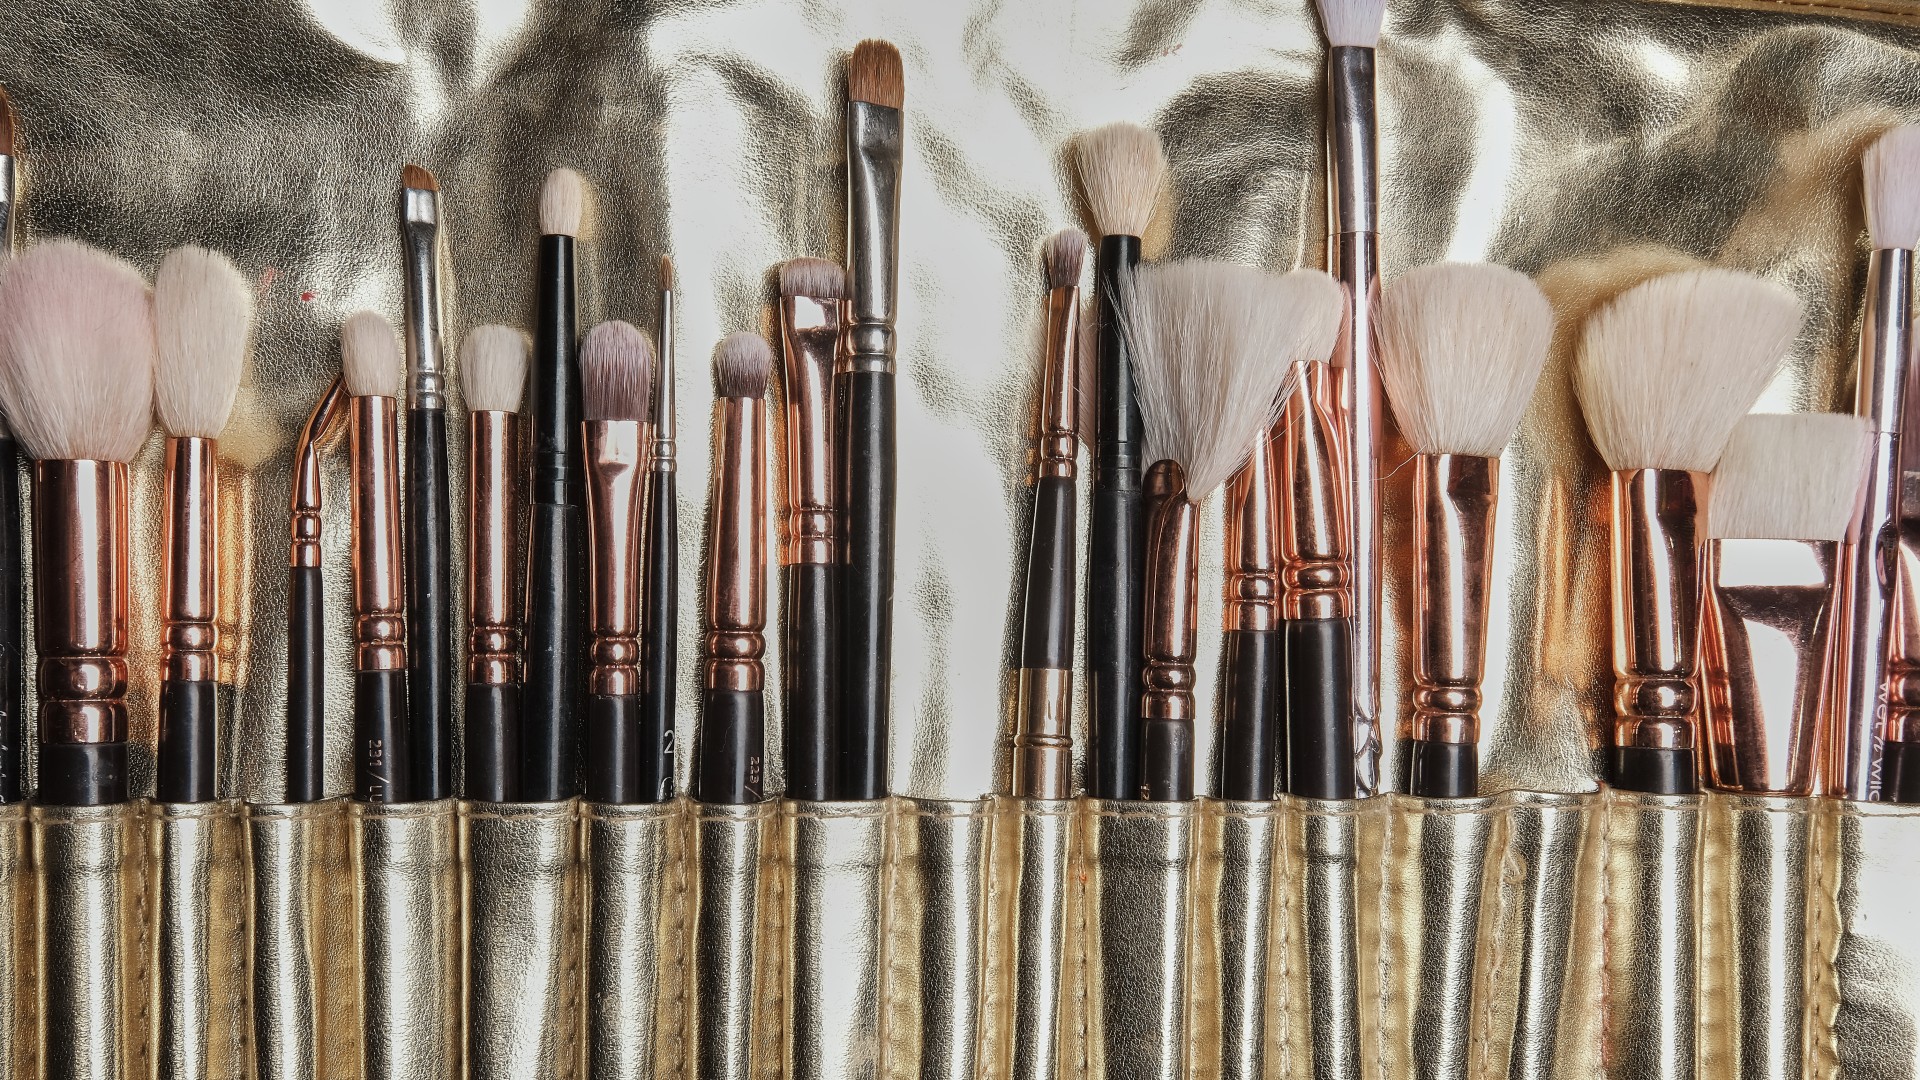 The 10 Best Makeup Brush Sets In 2023